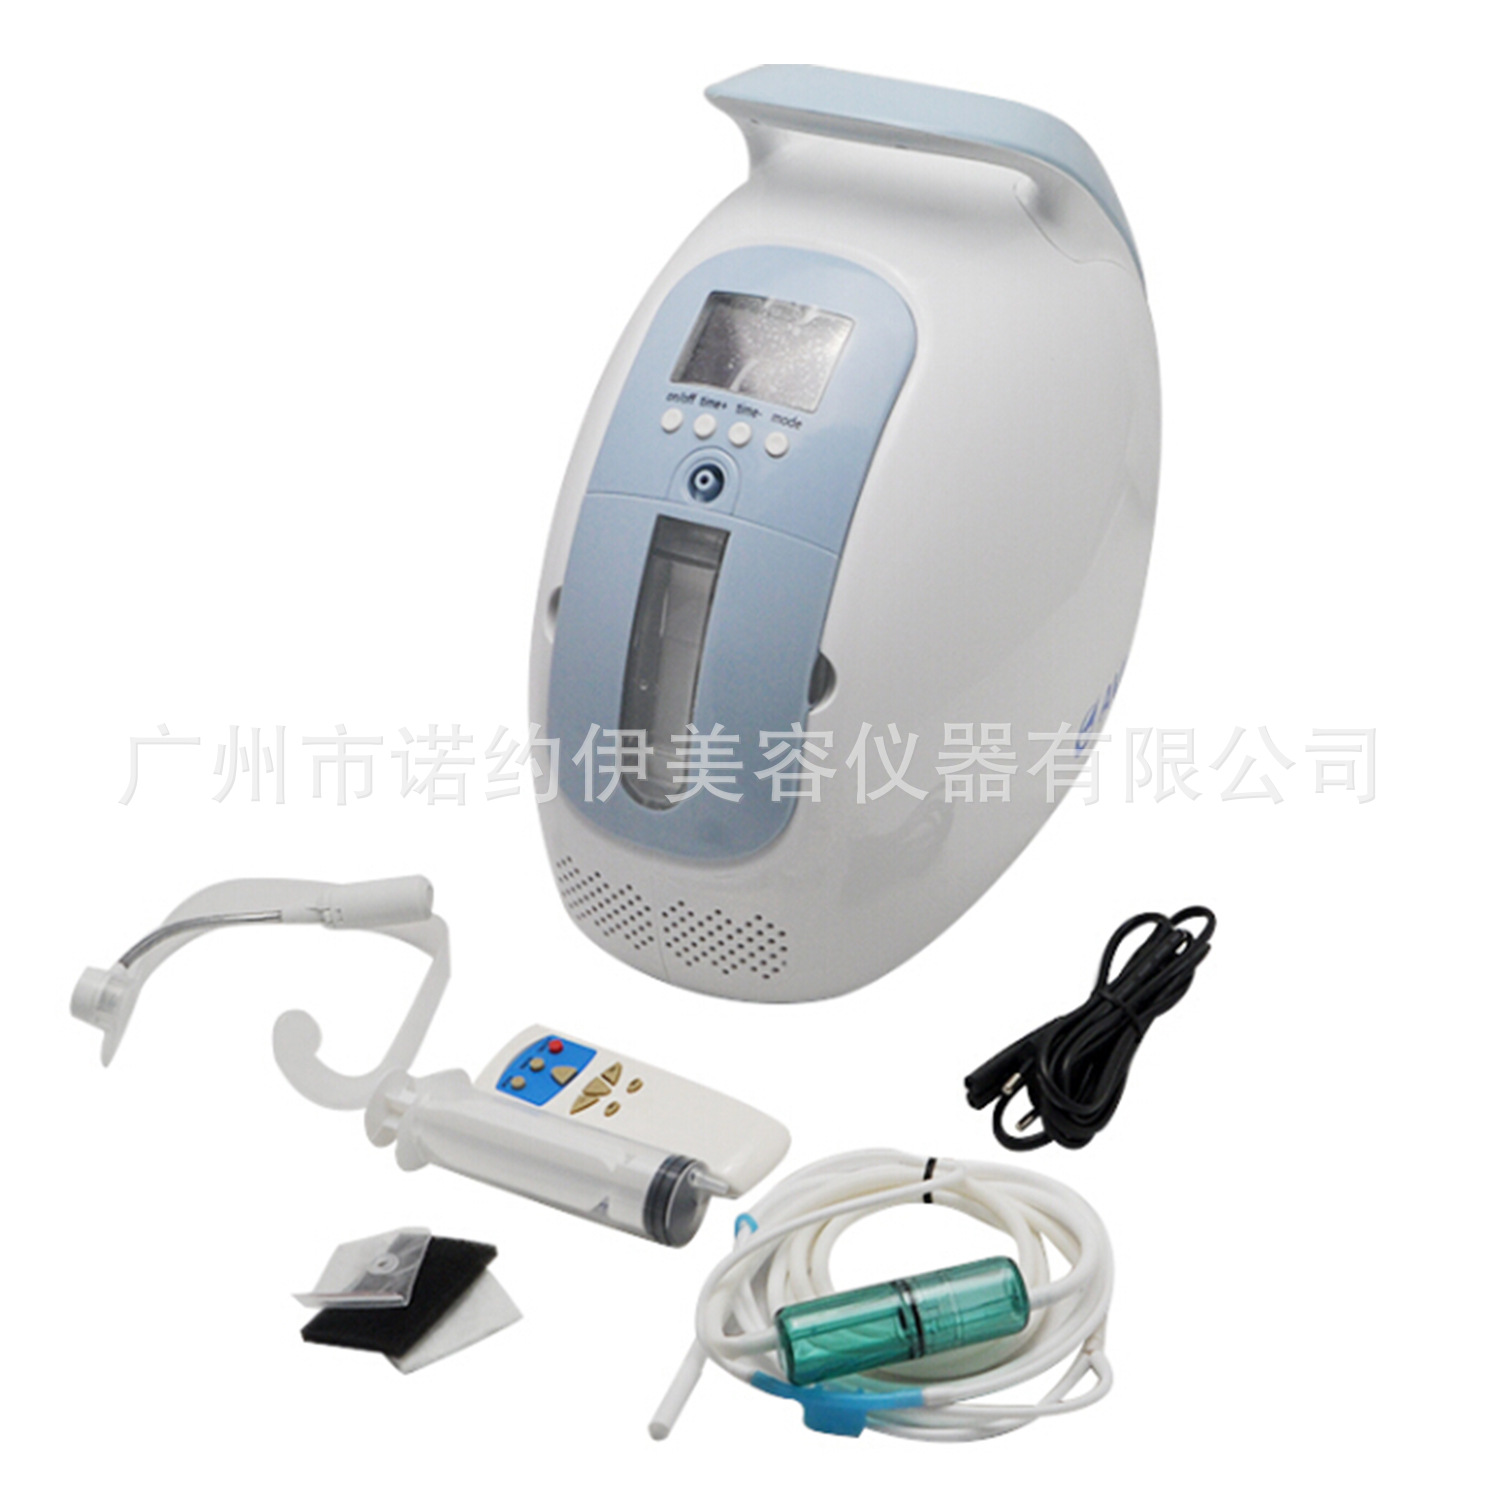 Factory Outlet Oxygenerator vehicle outdoors Oxygenerator the elderly pregnant woman Oxygen Bar 30%-90% Home oxygen